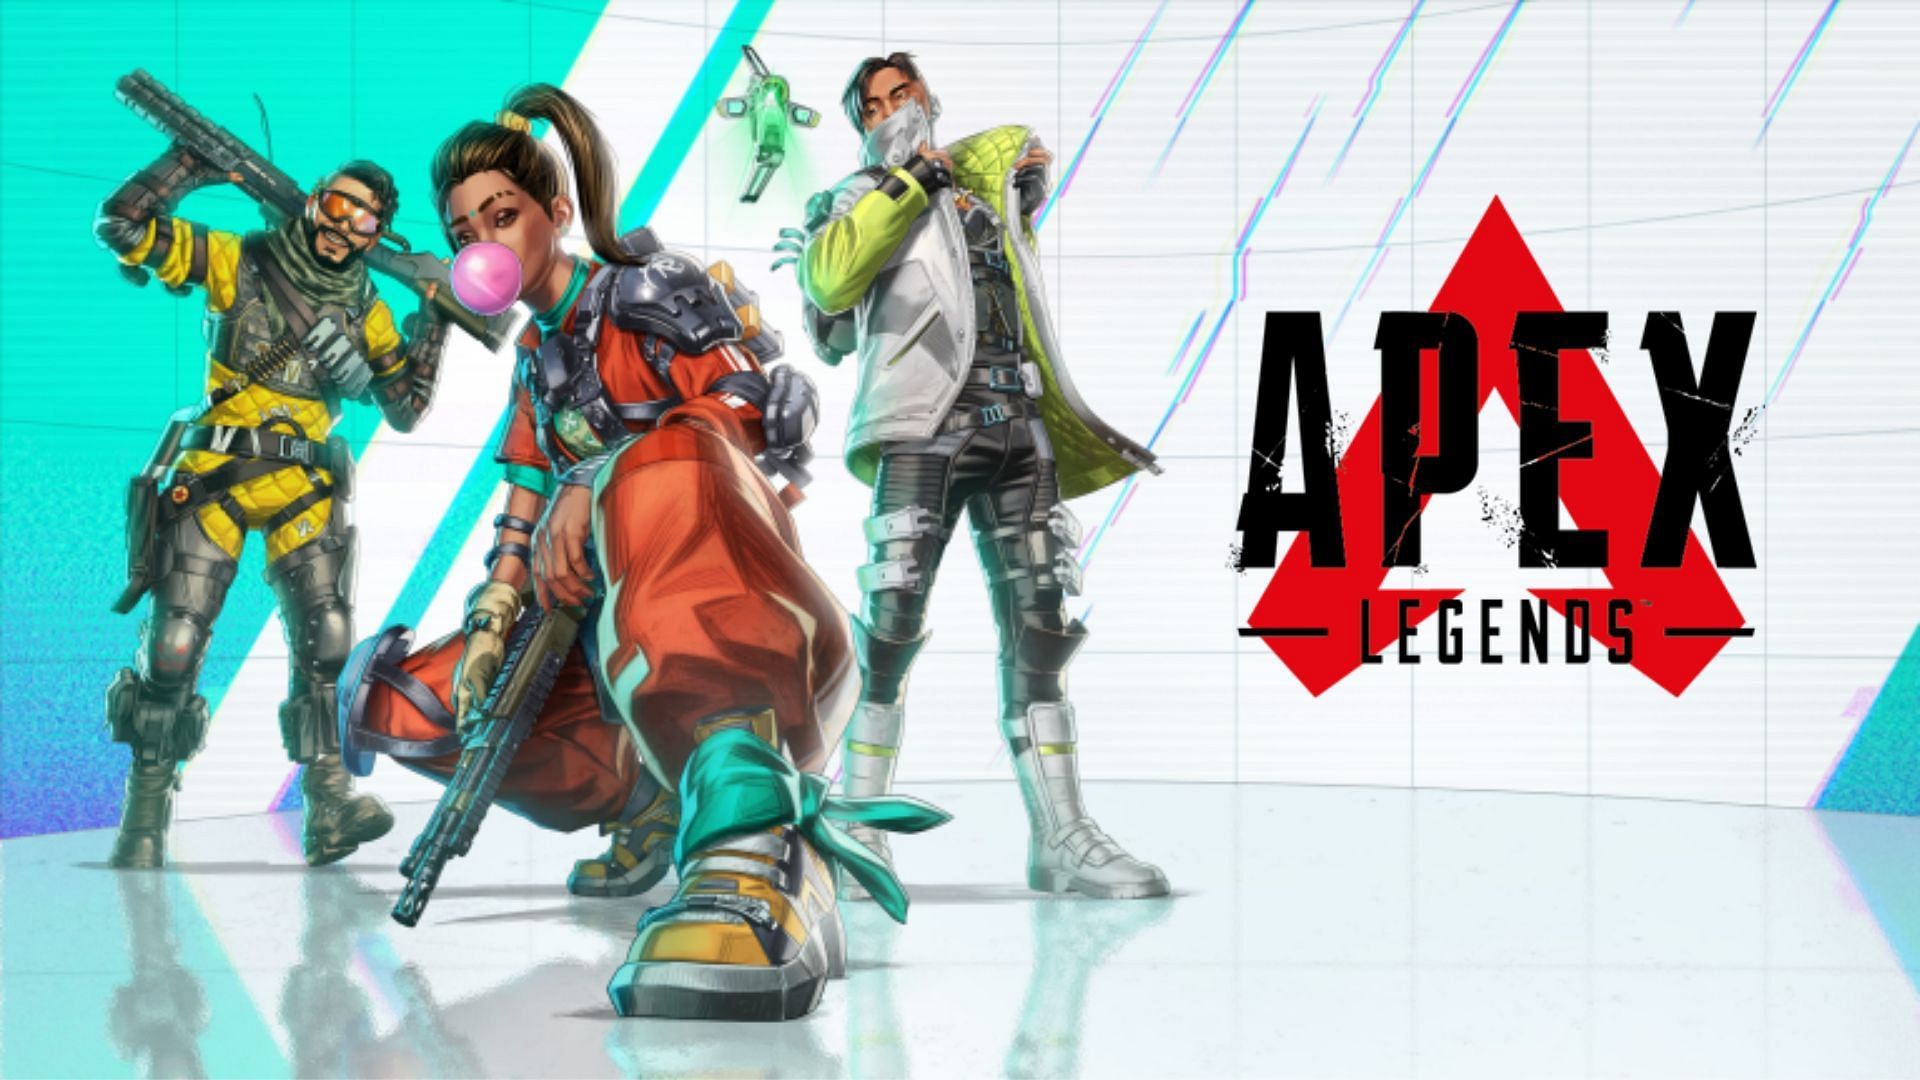 Is Ranked duos coming to Apex Legends? (Image via Electronic Arts)